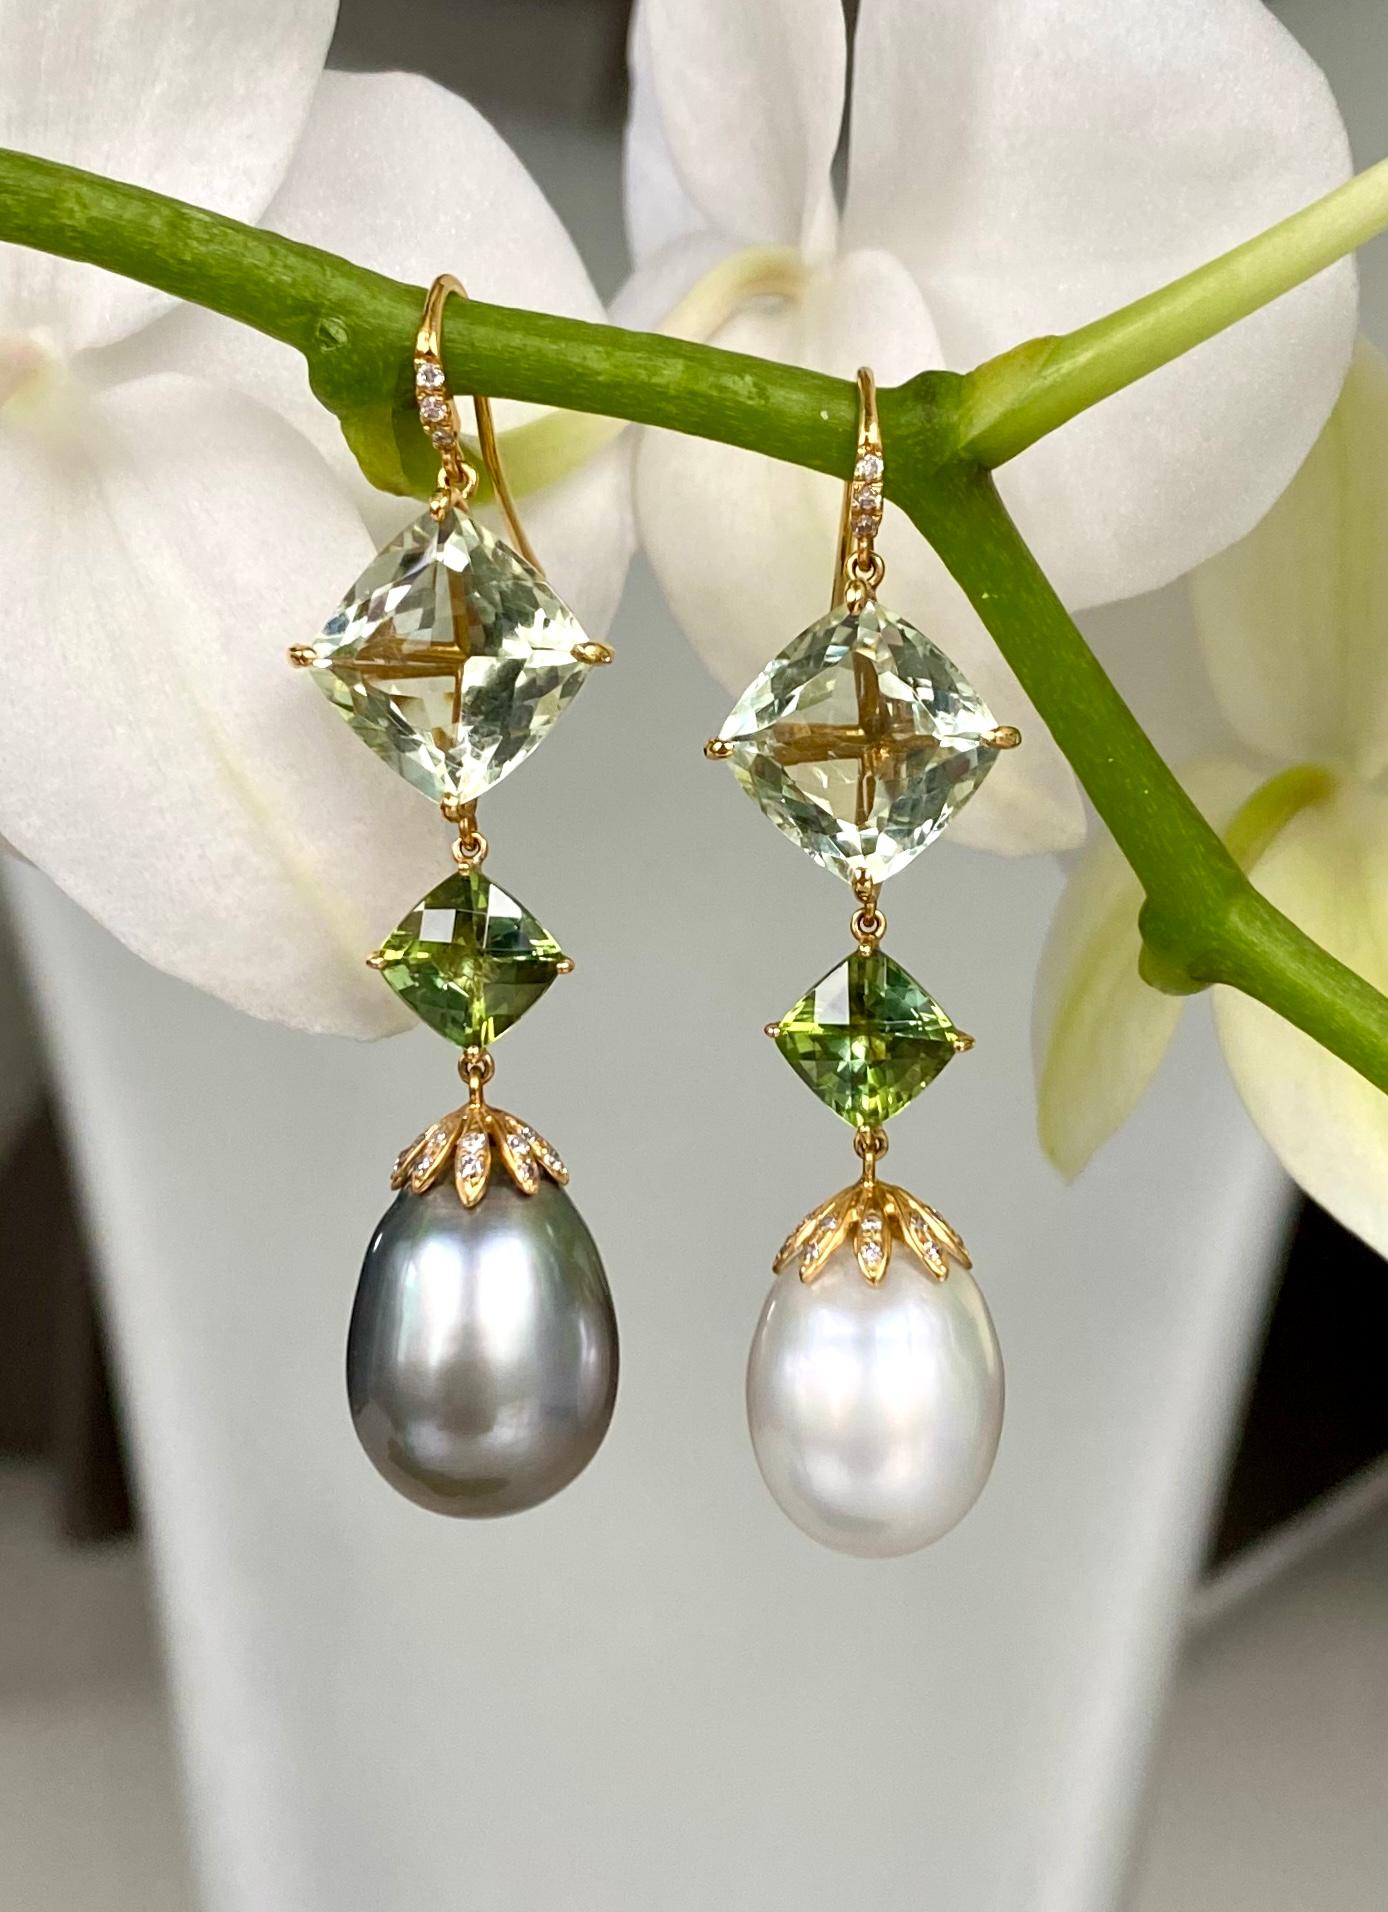 One-of-a-kind earrings of prasiolites, green tourmalines, South Sea and Tahitian pearls, and diamonds, handcrafted in 18 karat yellow gold.

These beautiful drop earrings boast perfectly mismatched grey Tahitian and white South Sea pearls, with